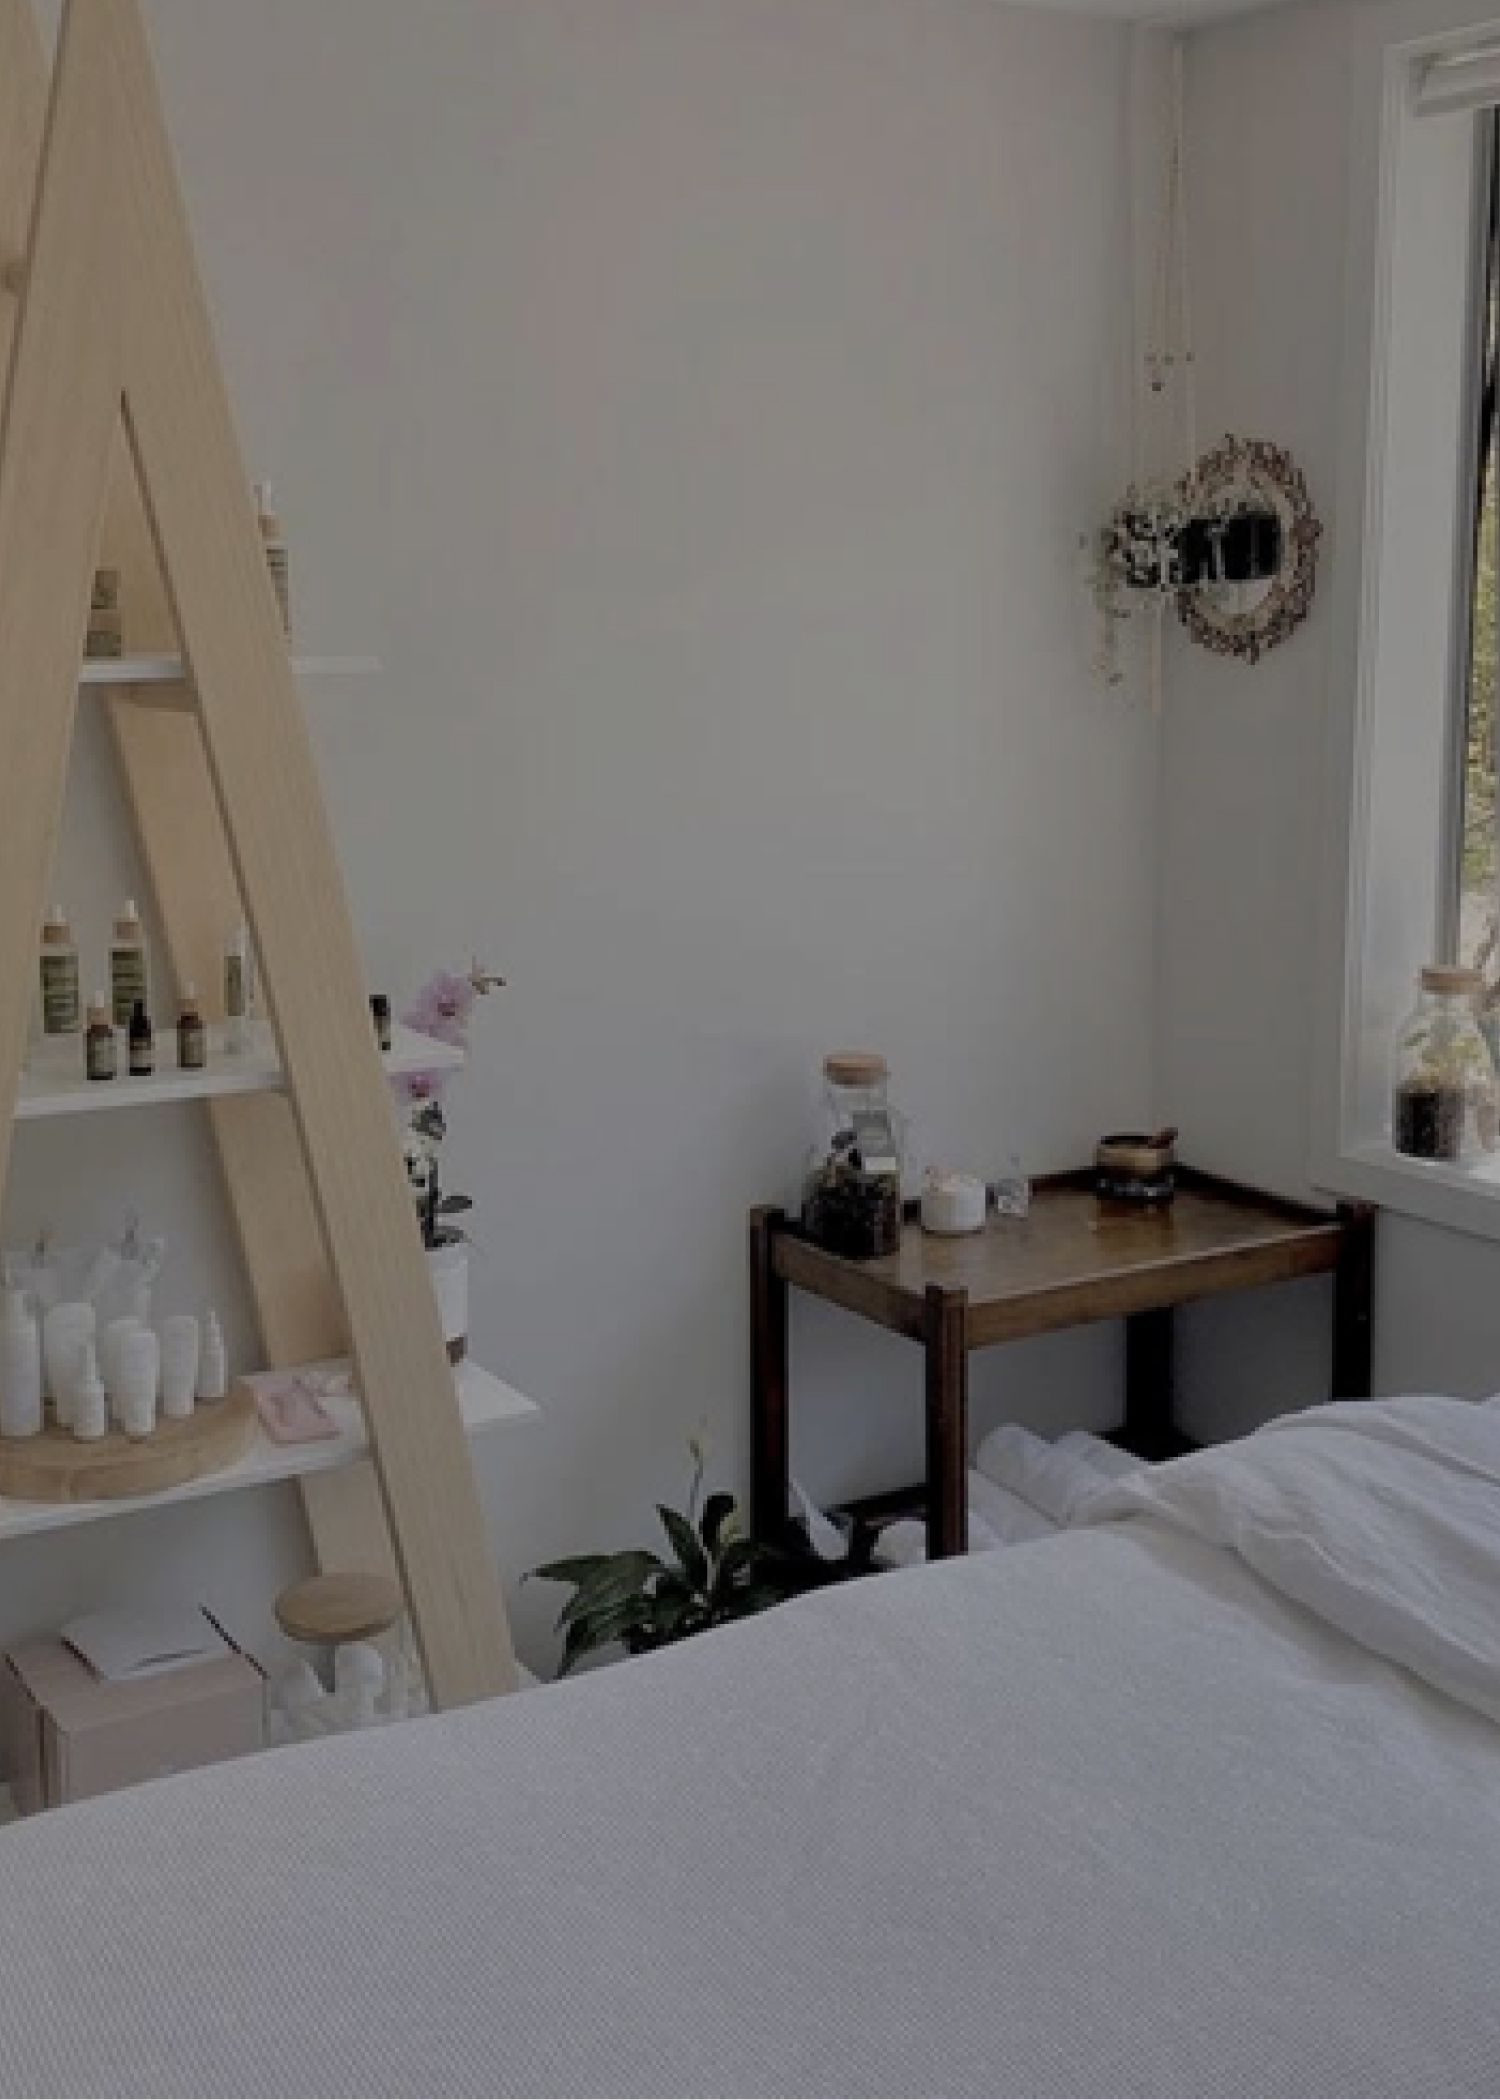 Spa bed with white sheets in a small white room with an open window and plenty of facial products on shelves